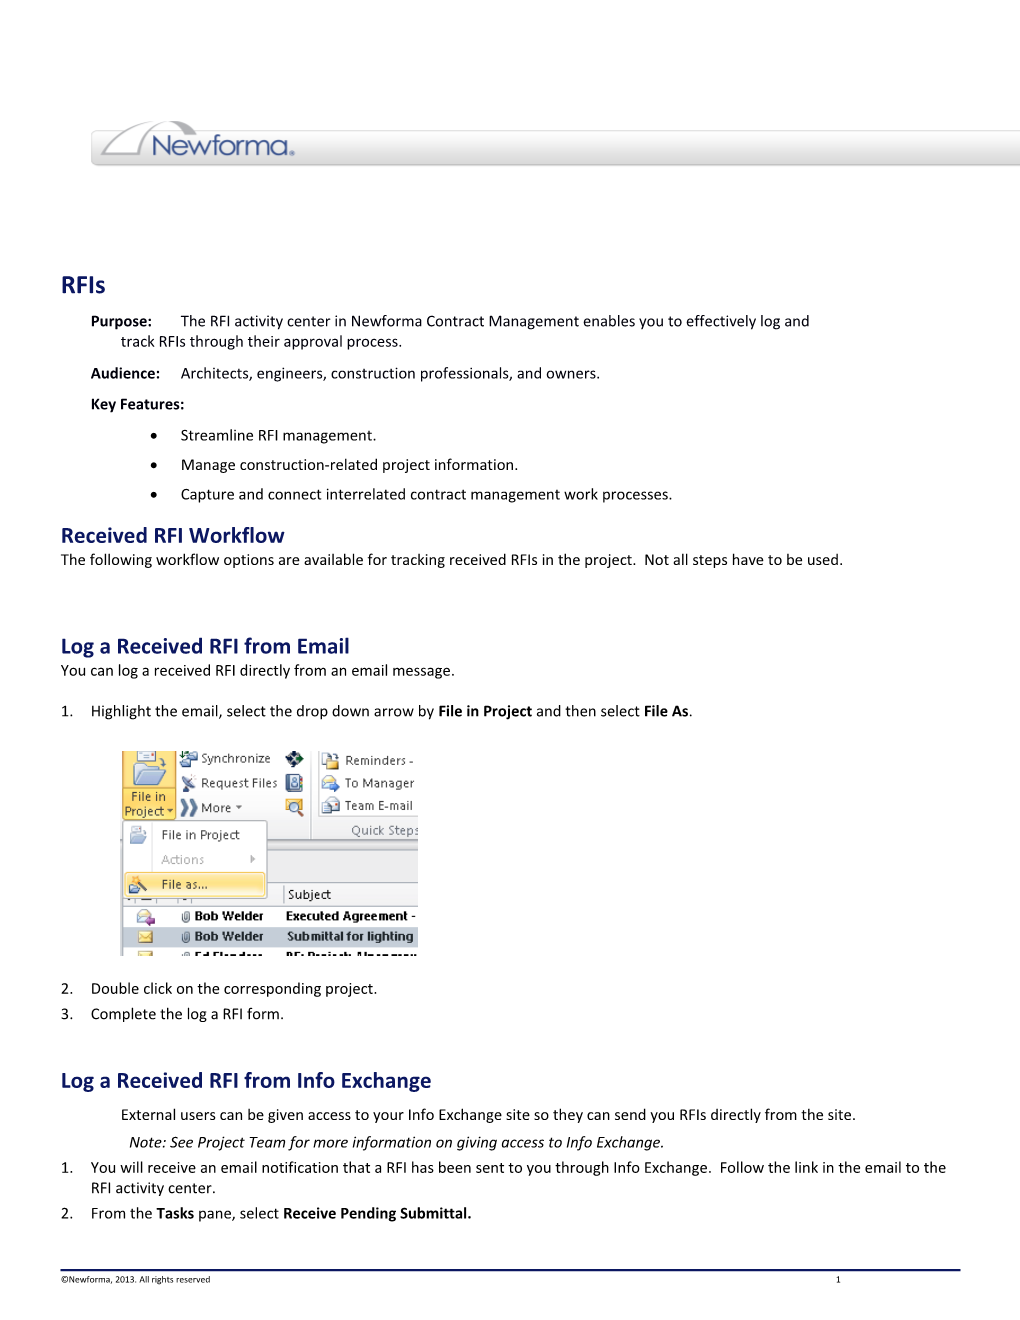 Newforma RFI Quick Reference Guide